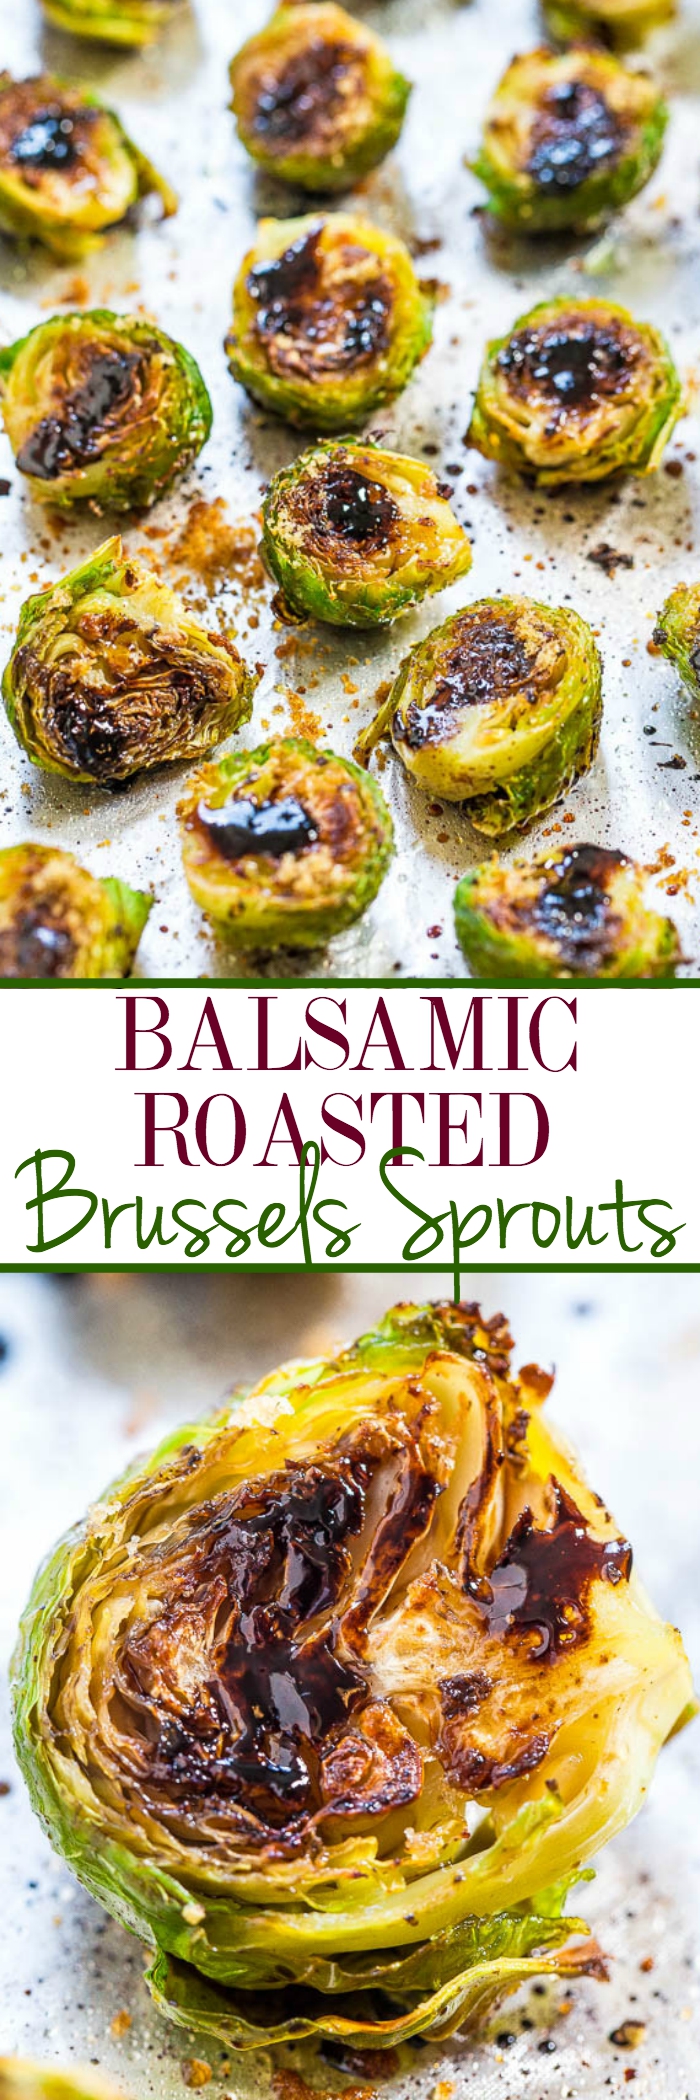 Balsamic Roasted Brussels Sprouts - Think you don't like brussels sprouts? The balsamic glaze on these will change your mind!! BEST brussels sprouts ever!! Fast, easy, and accidentally healthy!